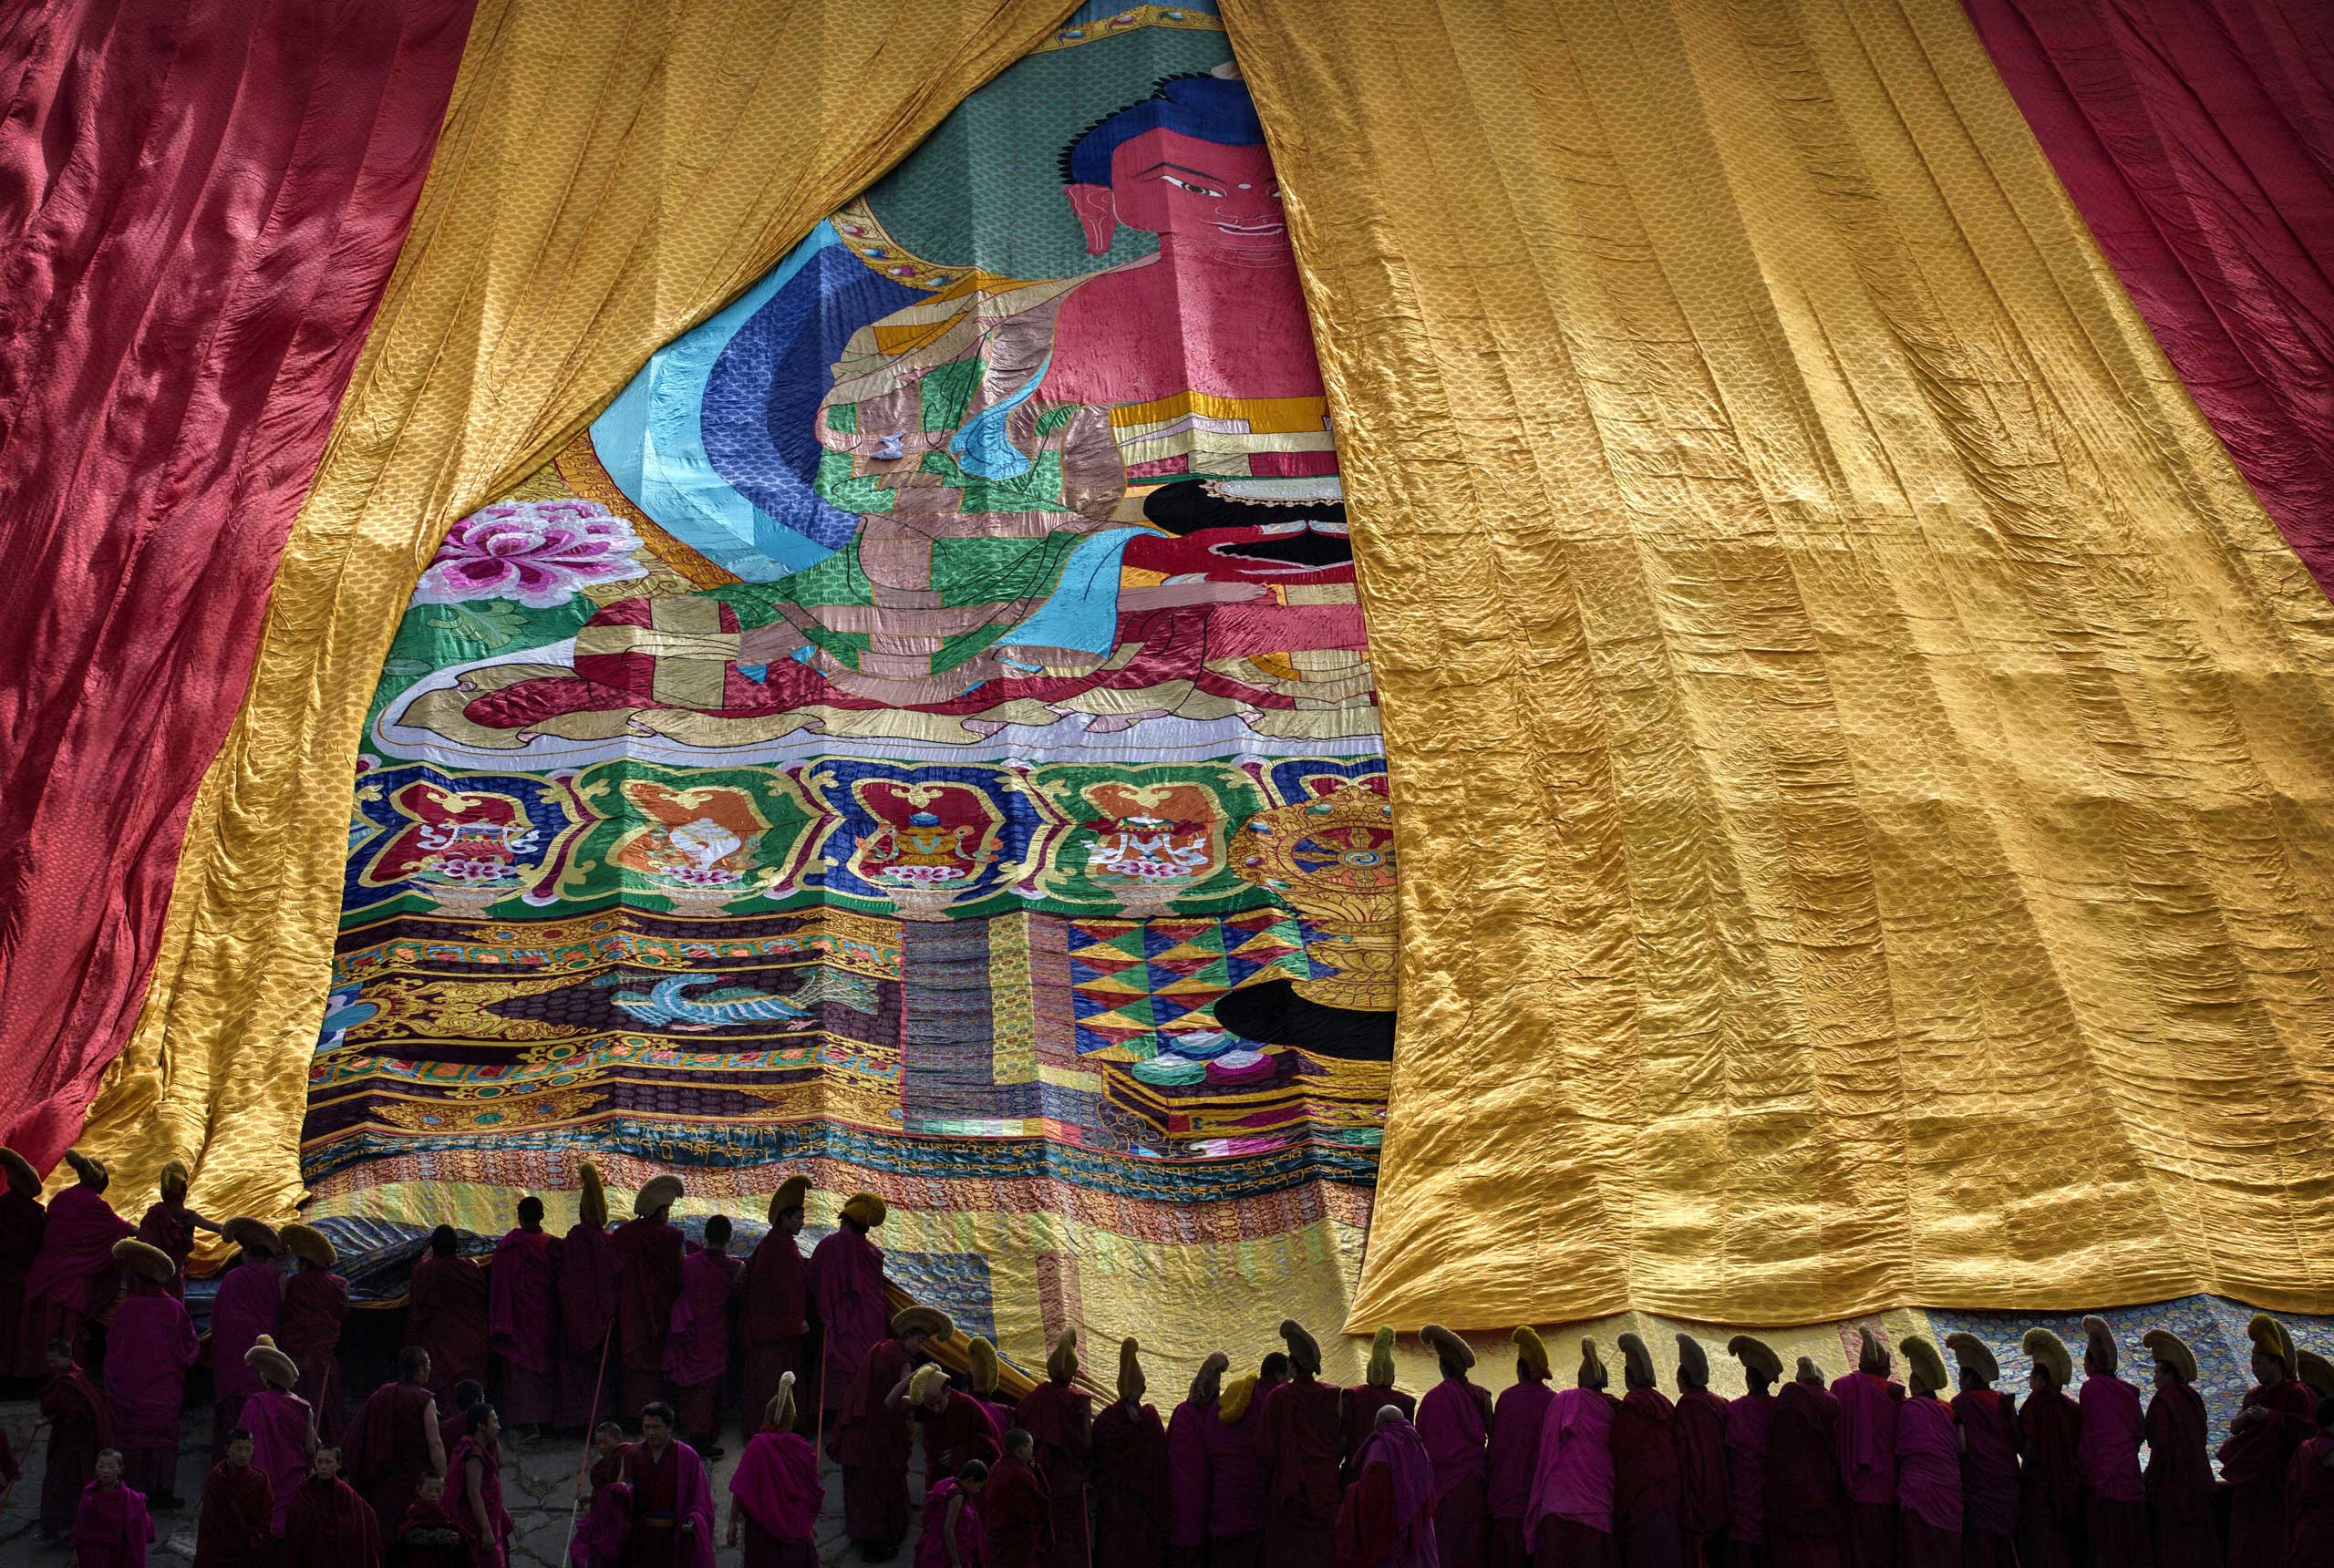 Tibetan Buddhist Monks of the Gelug, or Yellow Hat order, unveil a large thangka showing Buddha during Monlam or the Great Prayer rituals on March 3, 2015 at the Labrang Monastery.